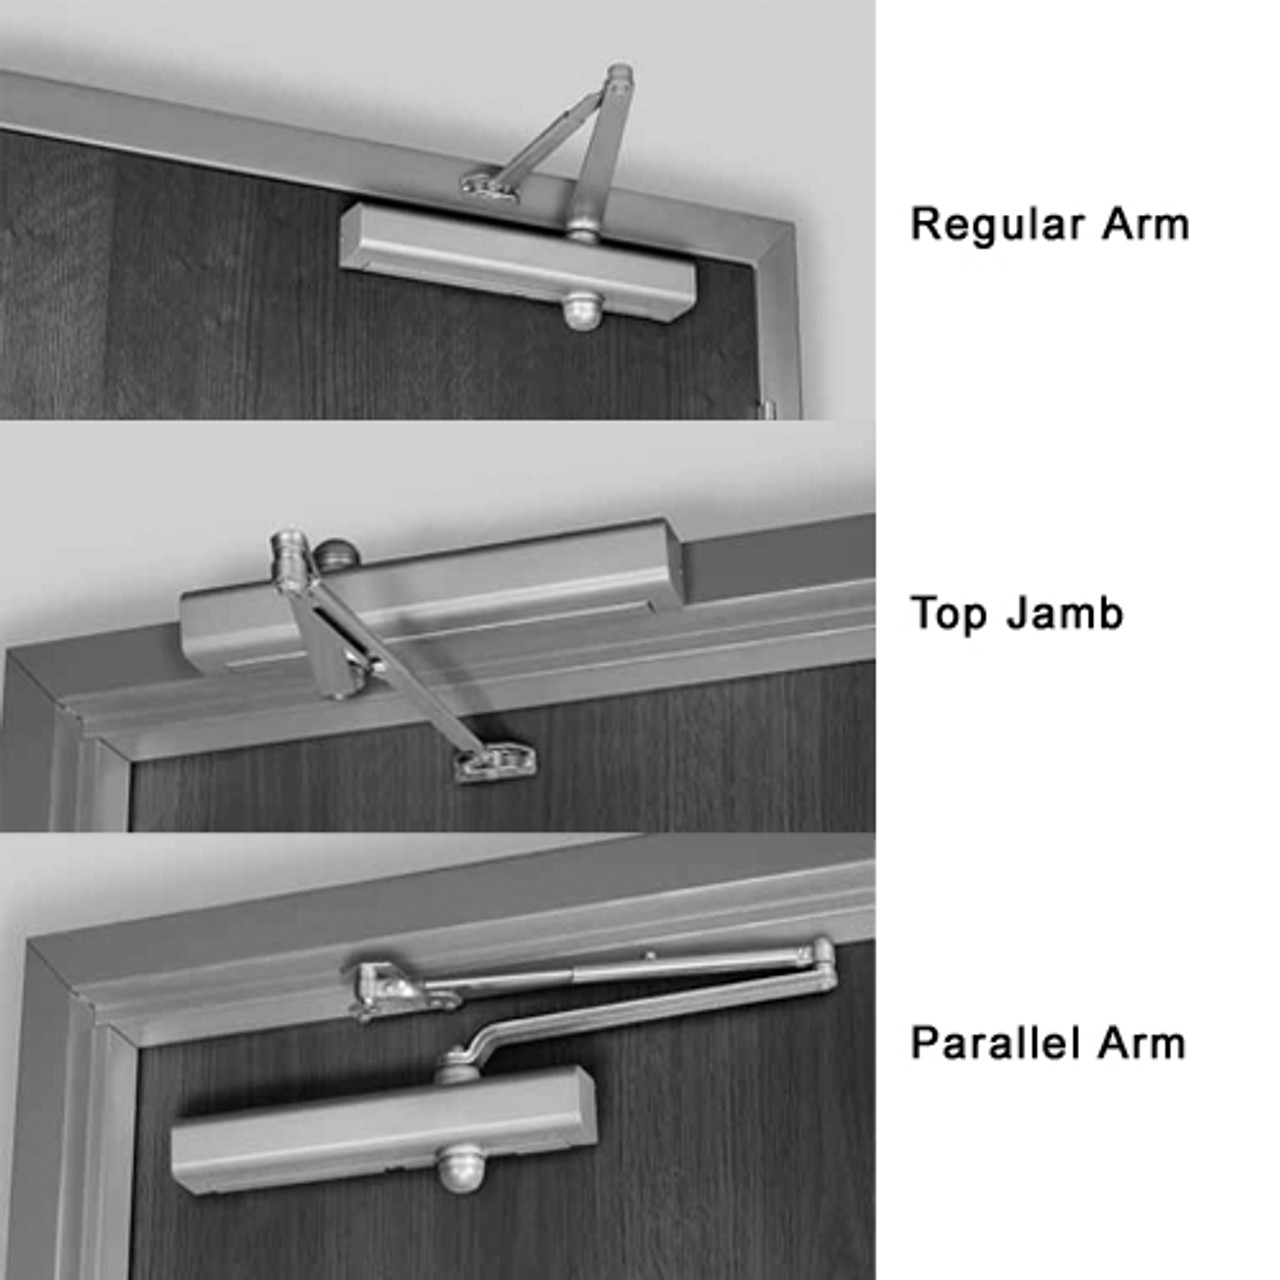 8101-694 Norton 8000 Series Non-Hold Open Door Closers with Regular Parallel and Top Jamb to 3 inch Reveal in Medium Amber Finish